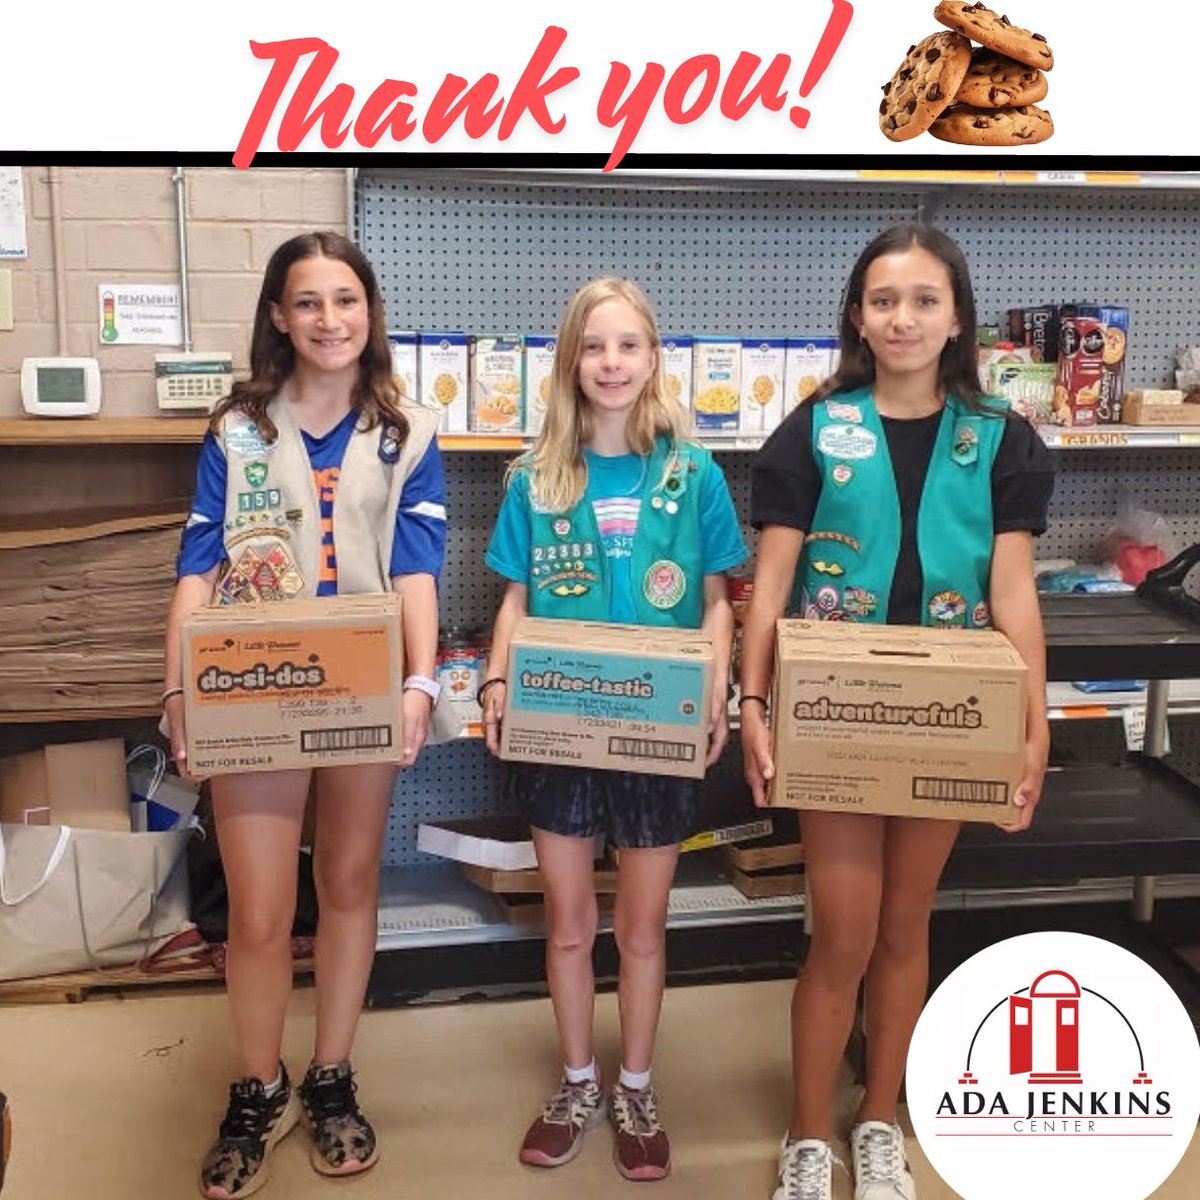 Girl Scout troop 159 recently donated cookies for our food pantry clients, as part of their 'Cookies for a Cause' program. Thank you for thinking of thinking of our clients in such a sweet way! 💖
@girlscouts